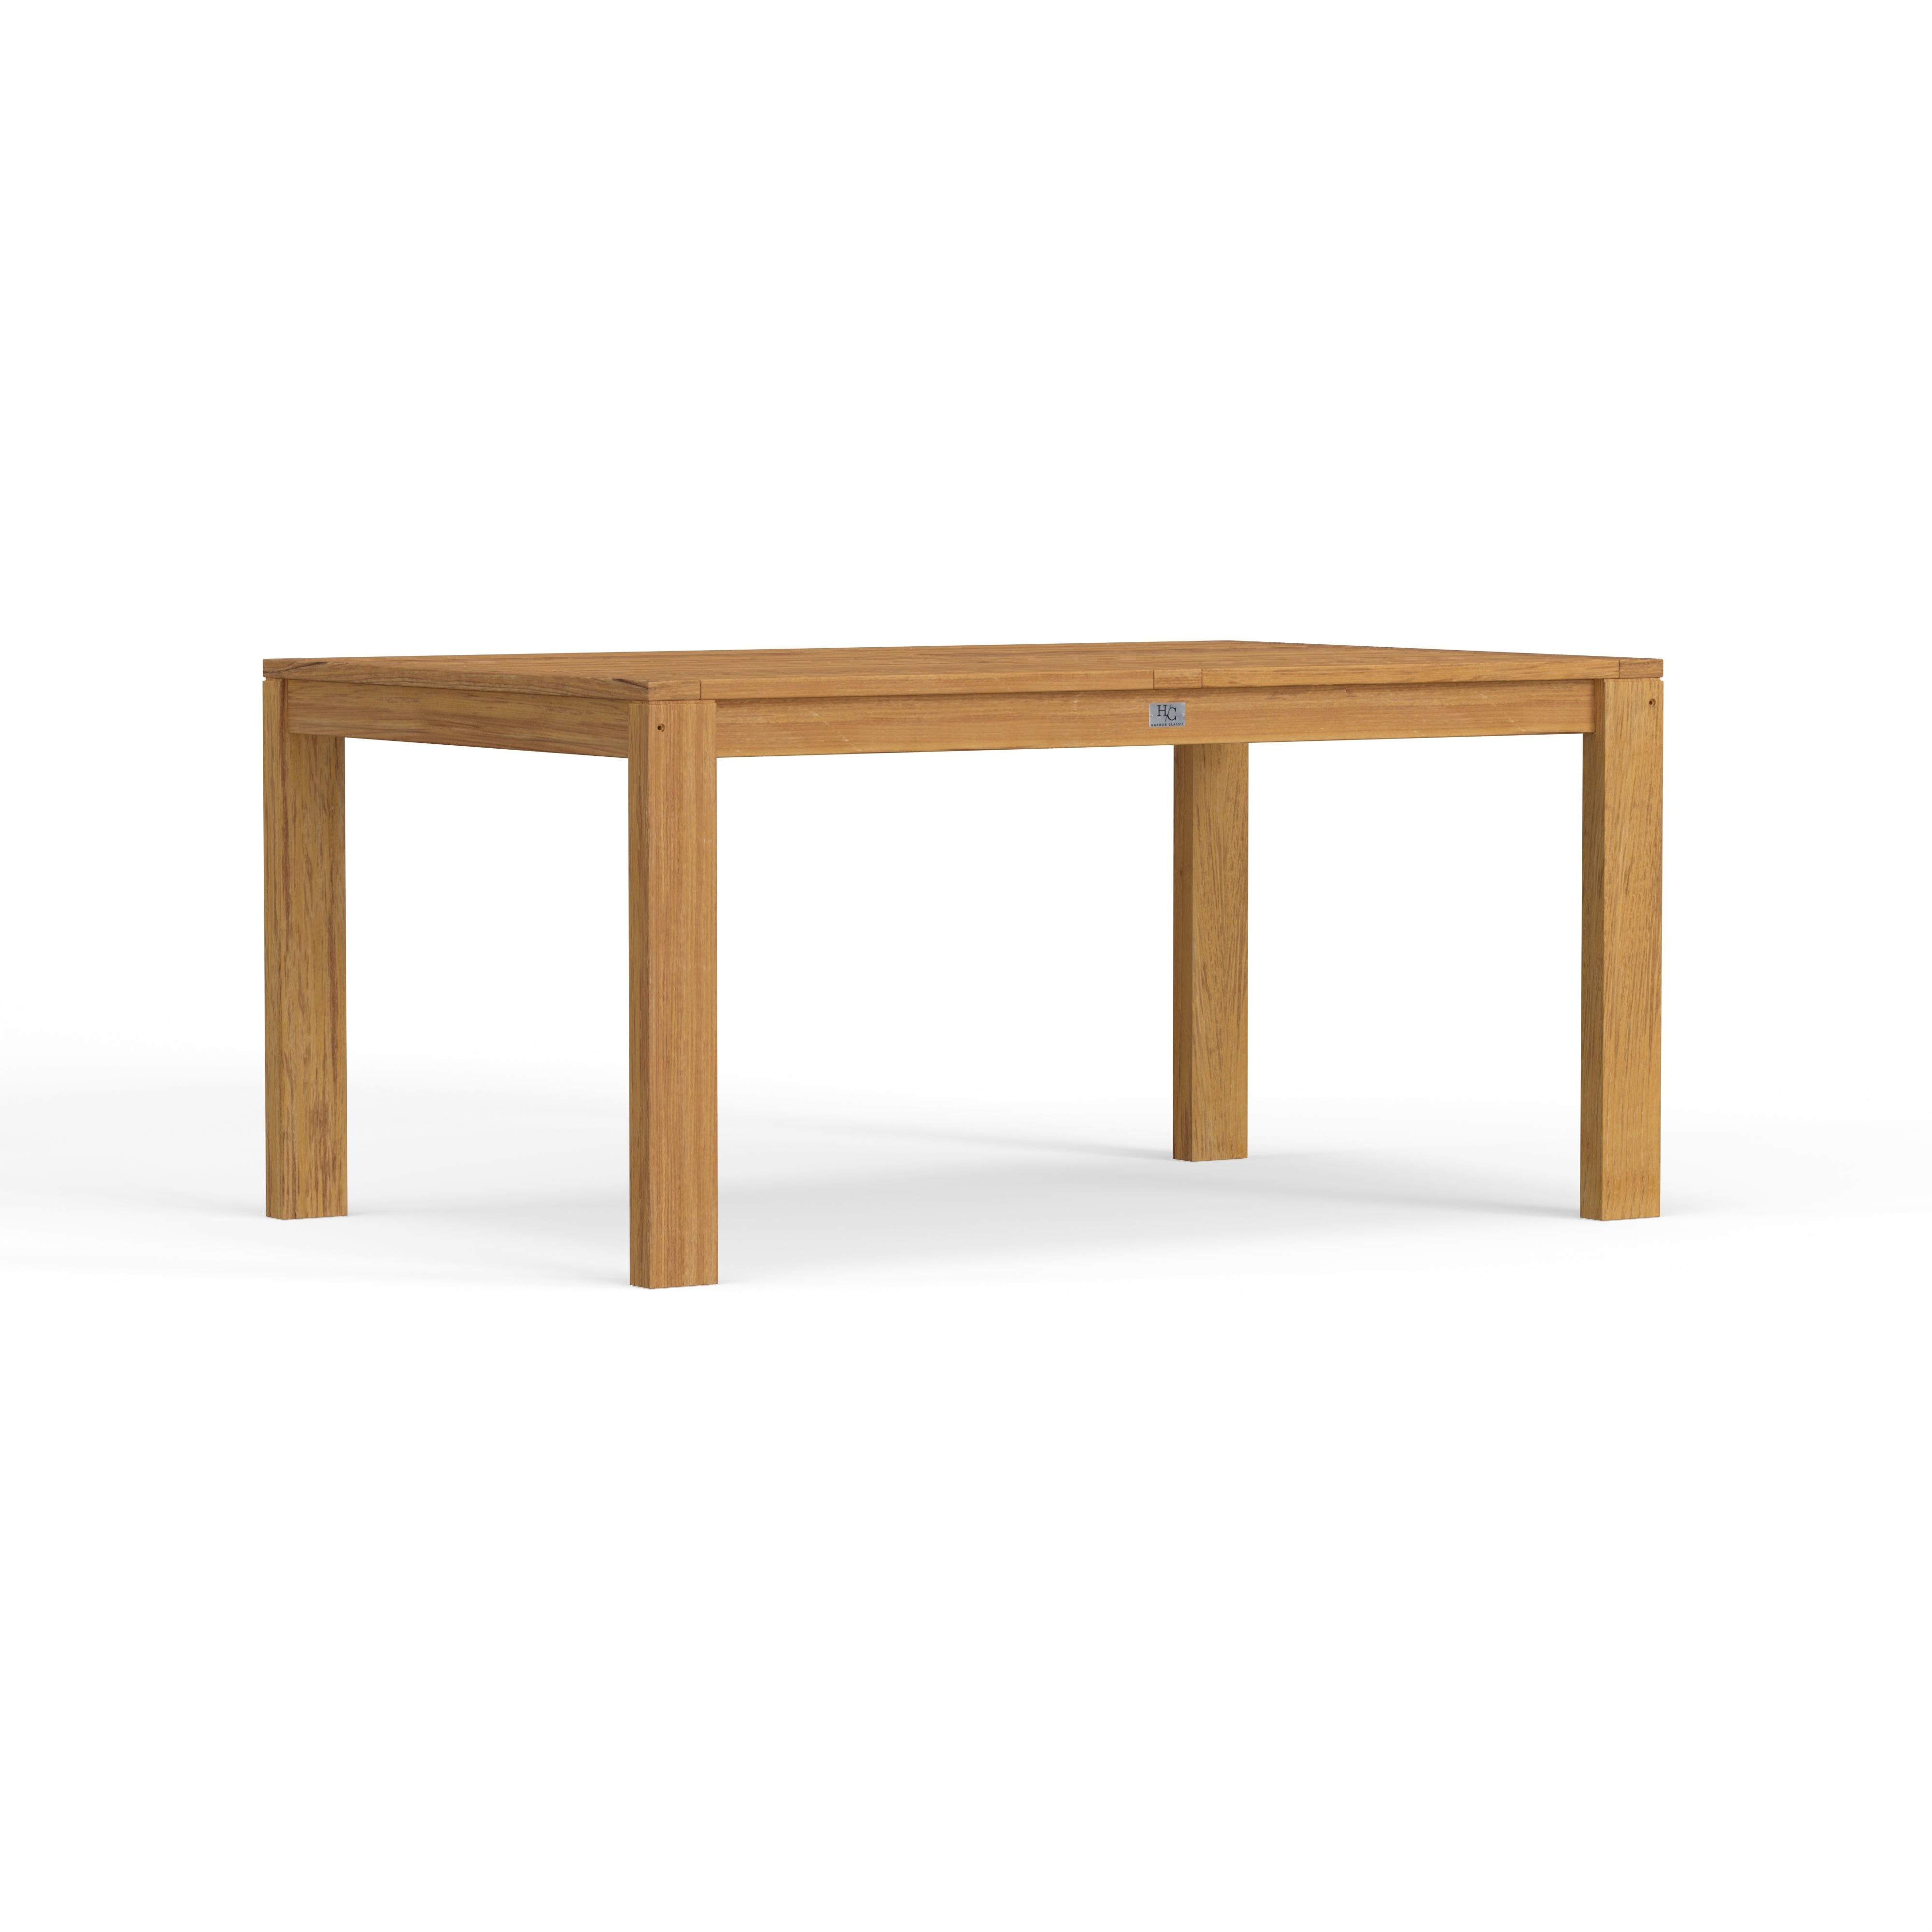  Best Quality Outdoor Teak Wood Dining Table